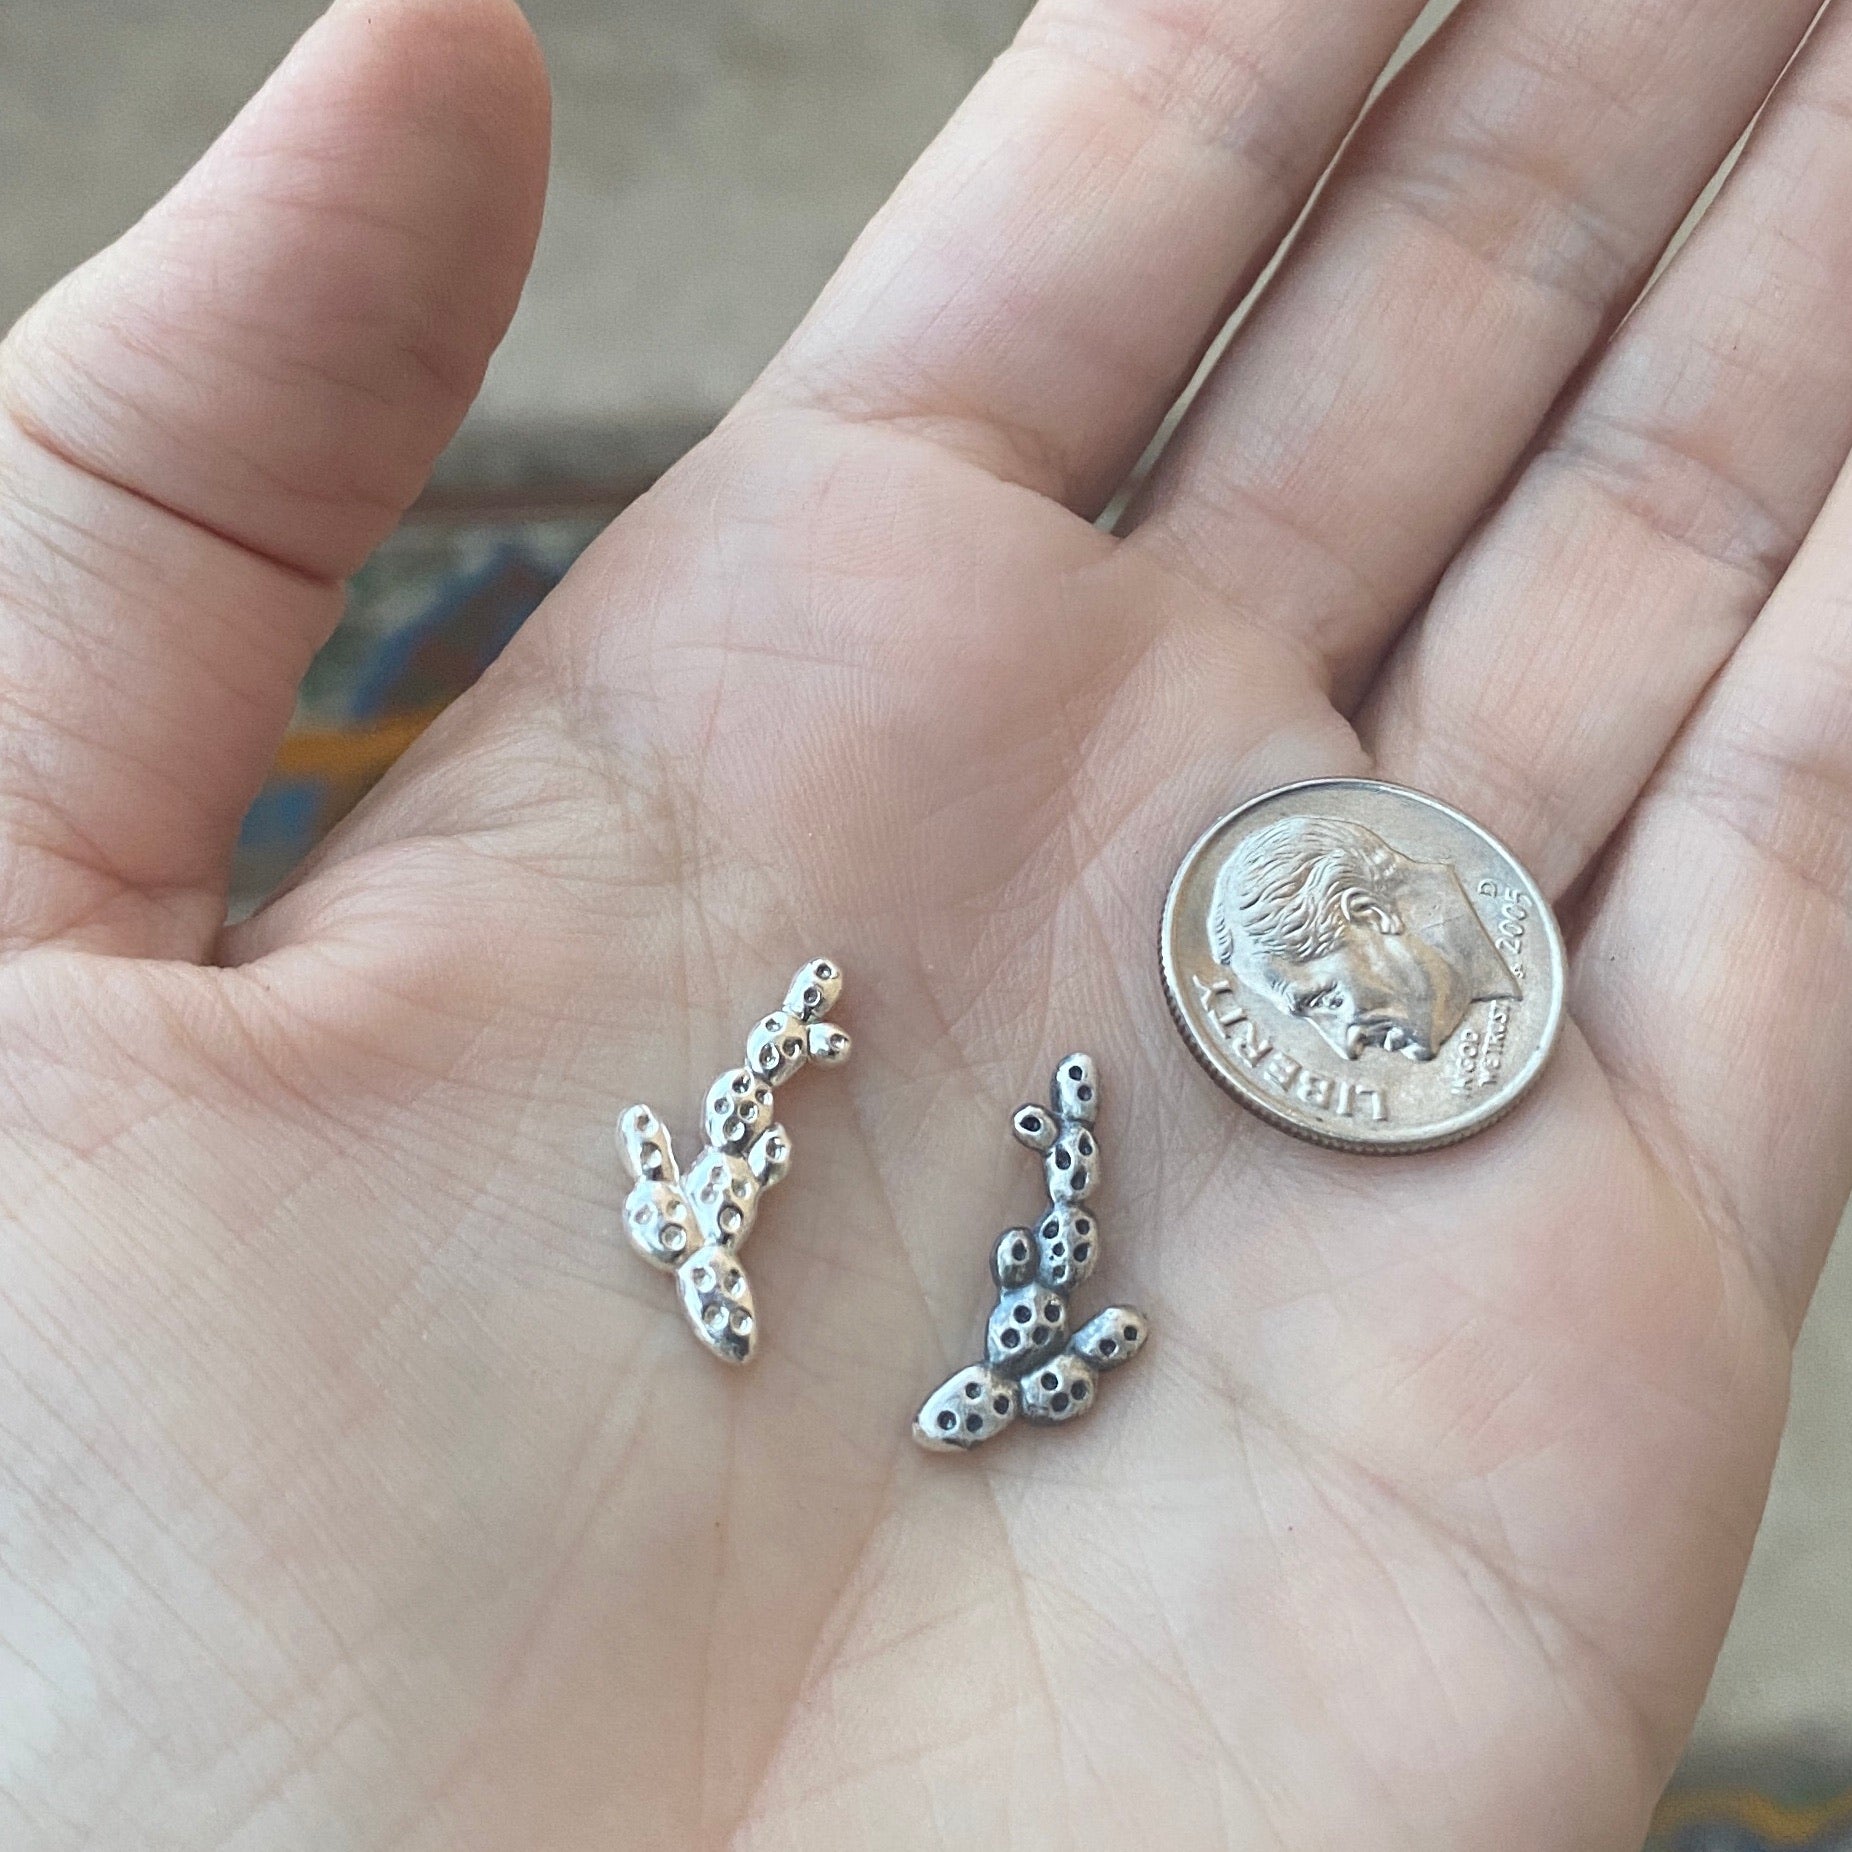 silver prickly pear casting with dime for size reference